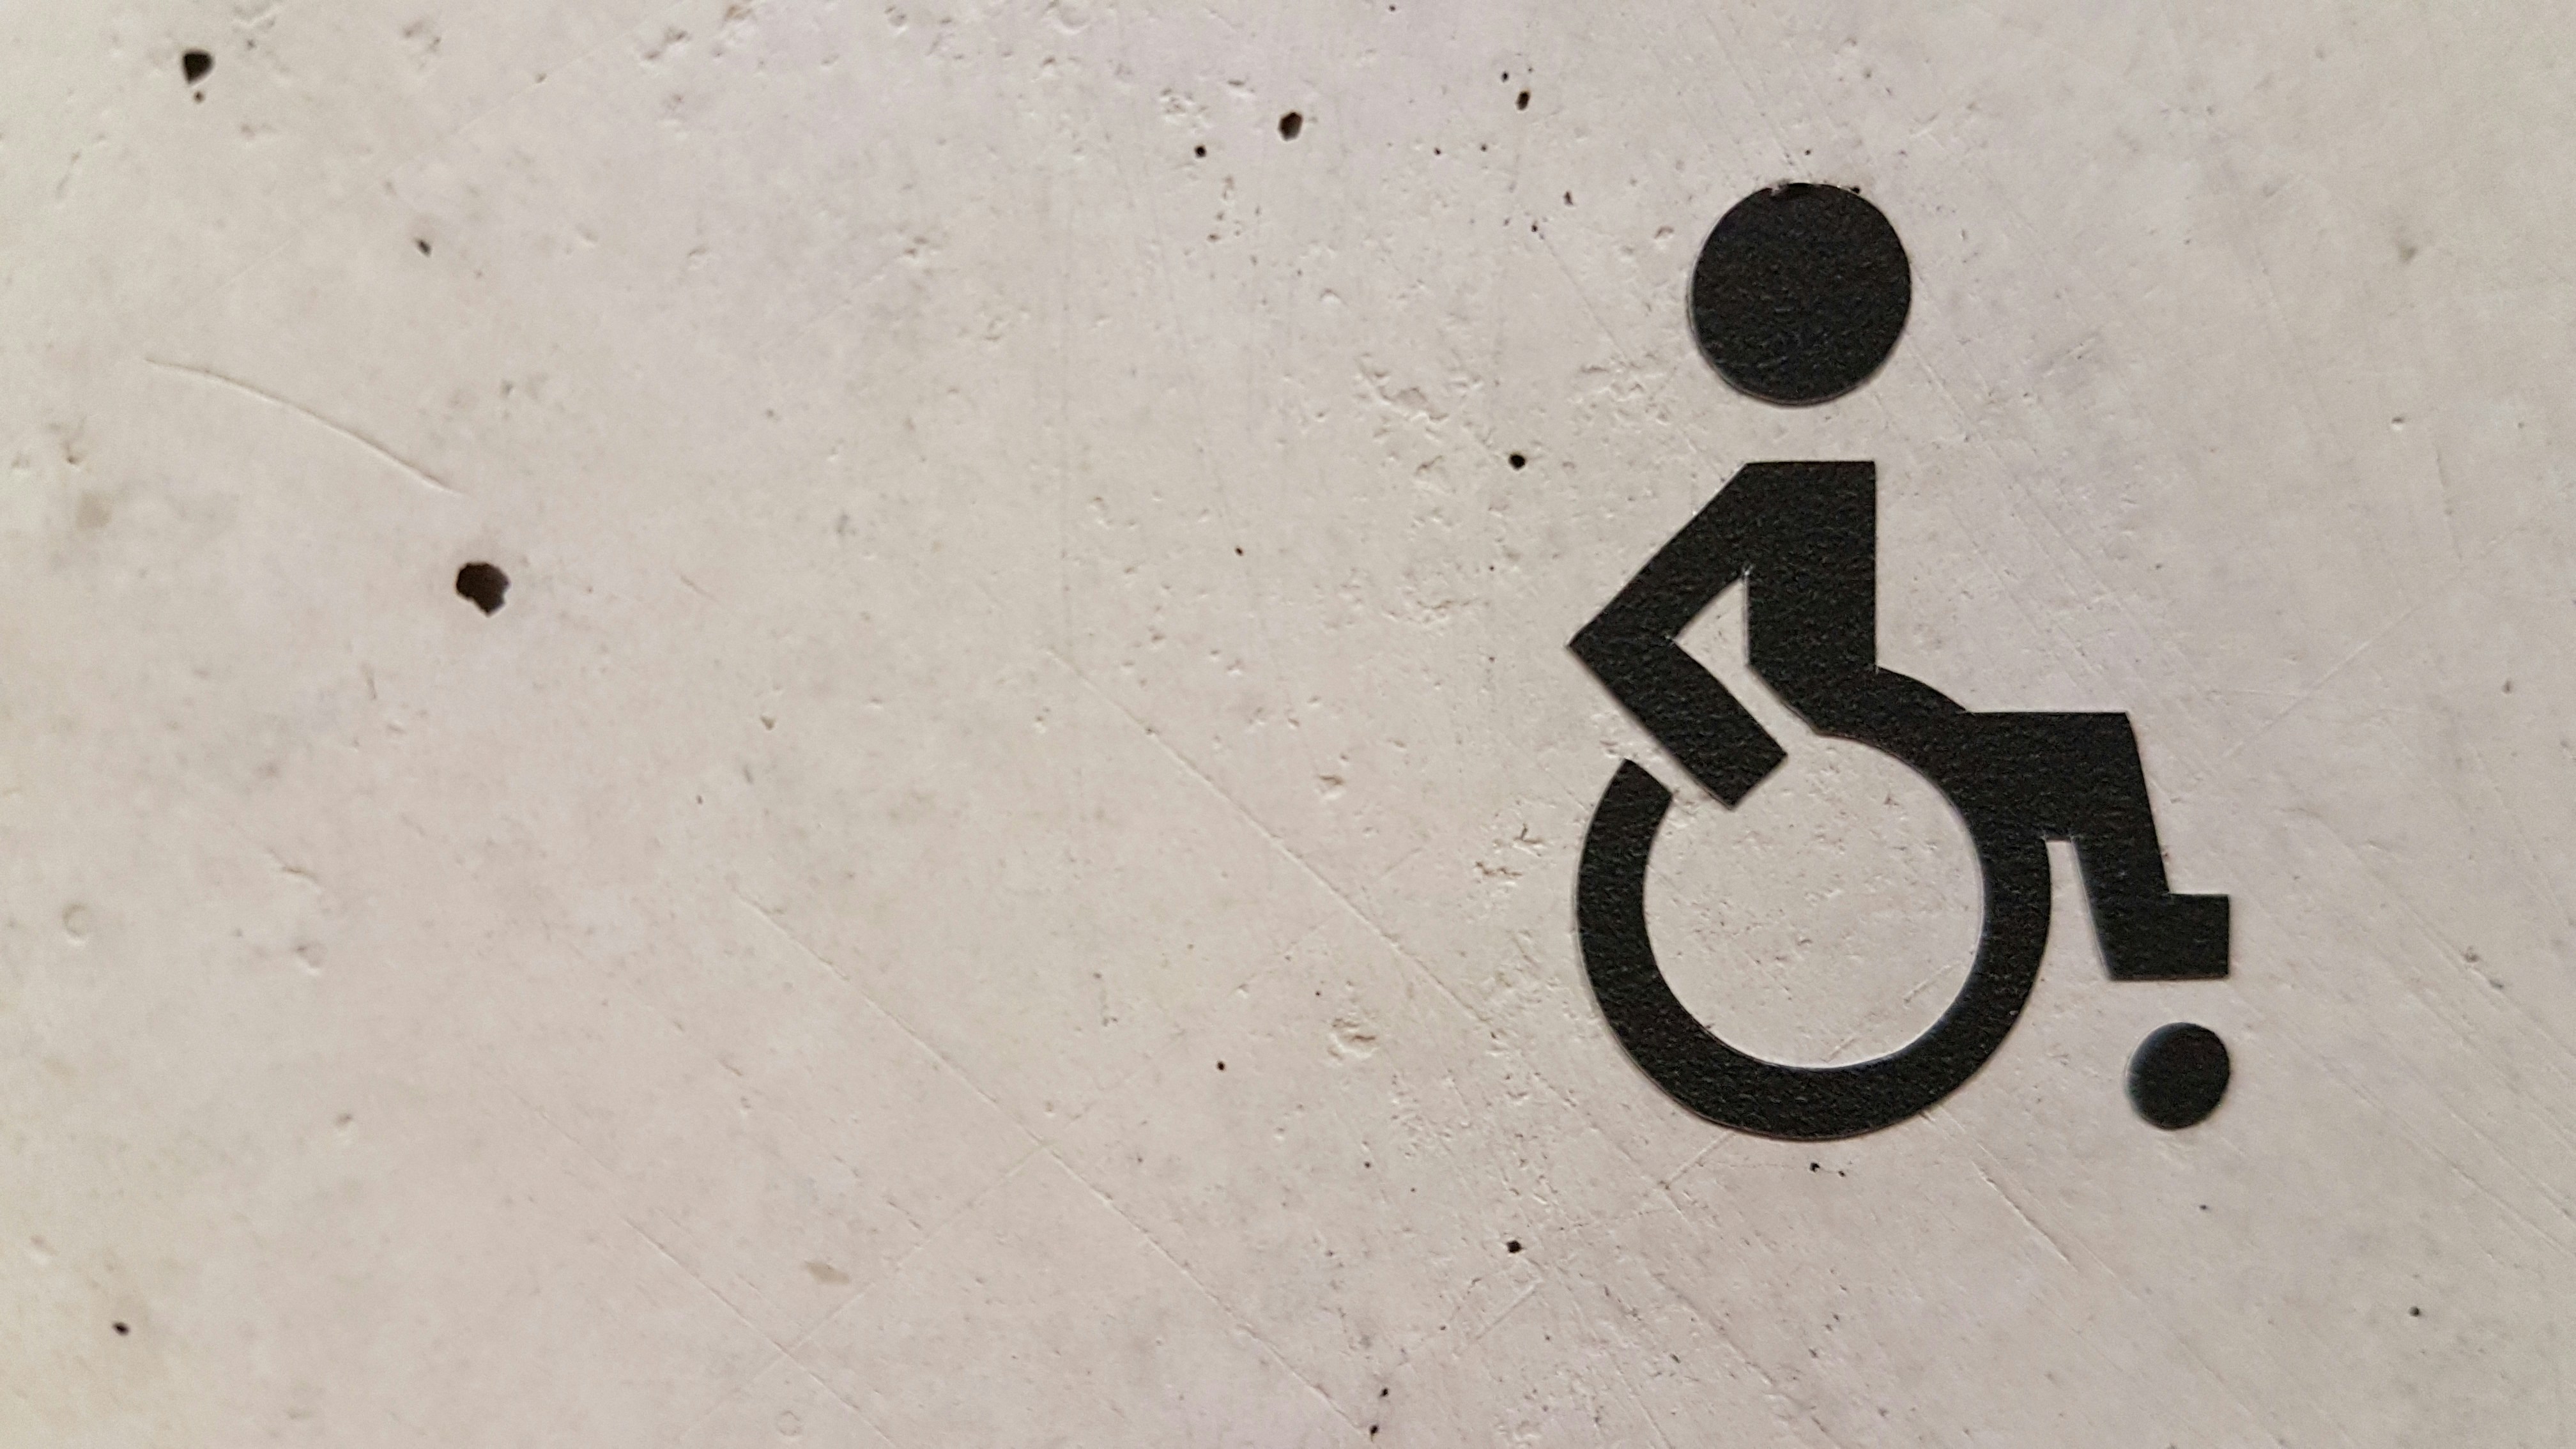 Accessibility Via Public Transportation for Wheelchair Users